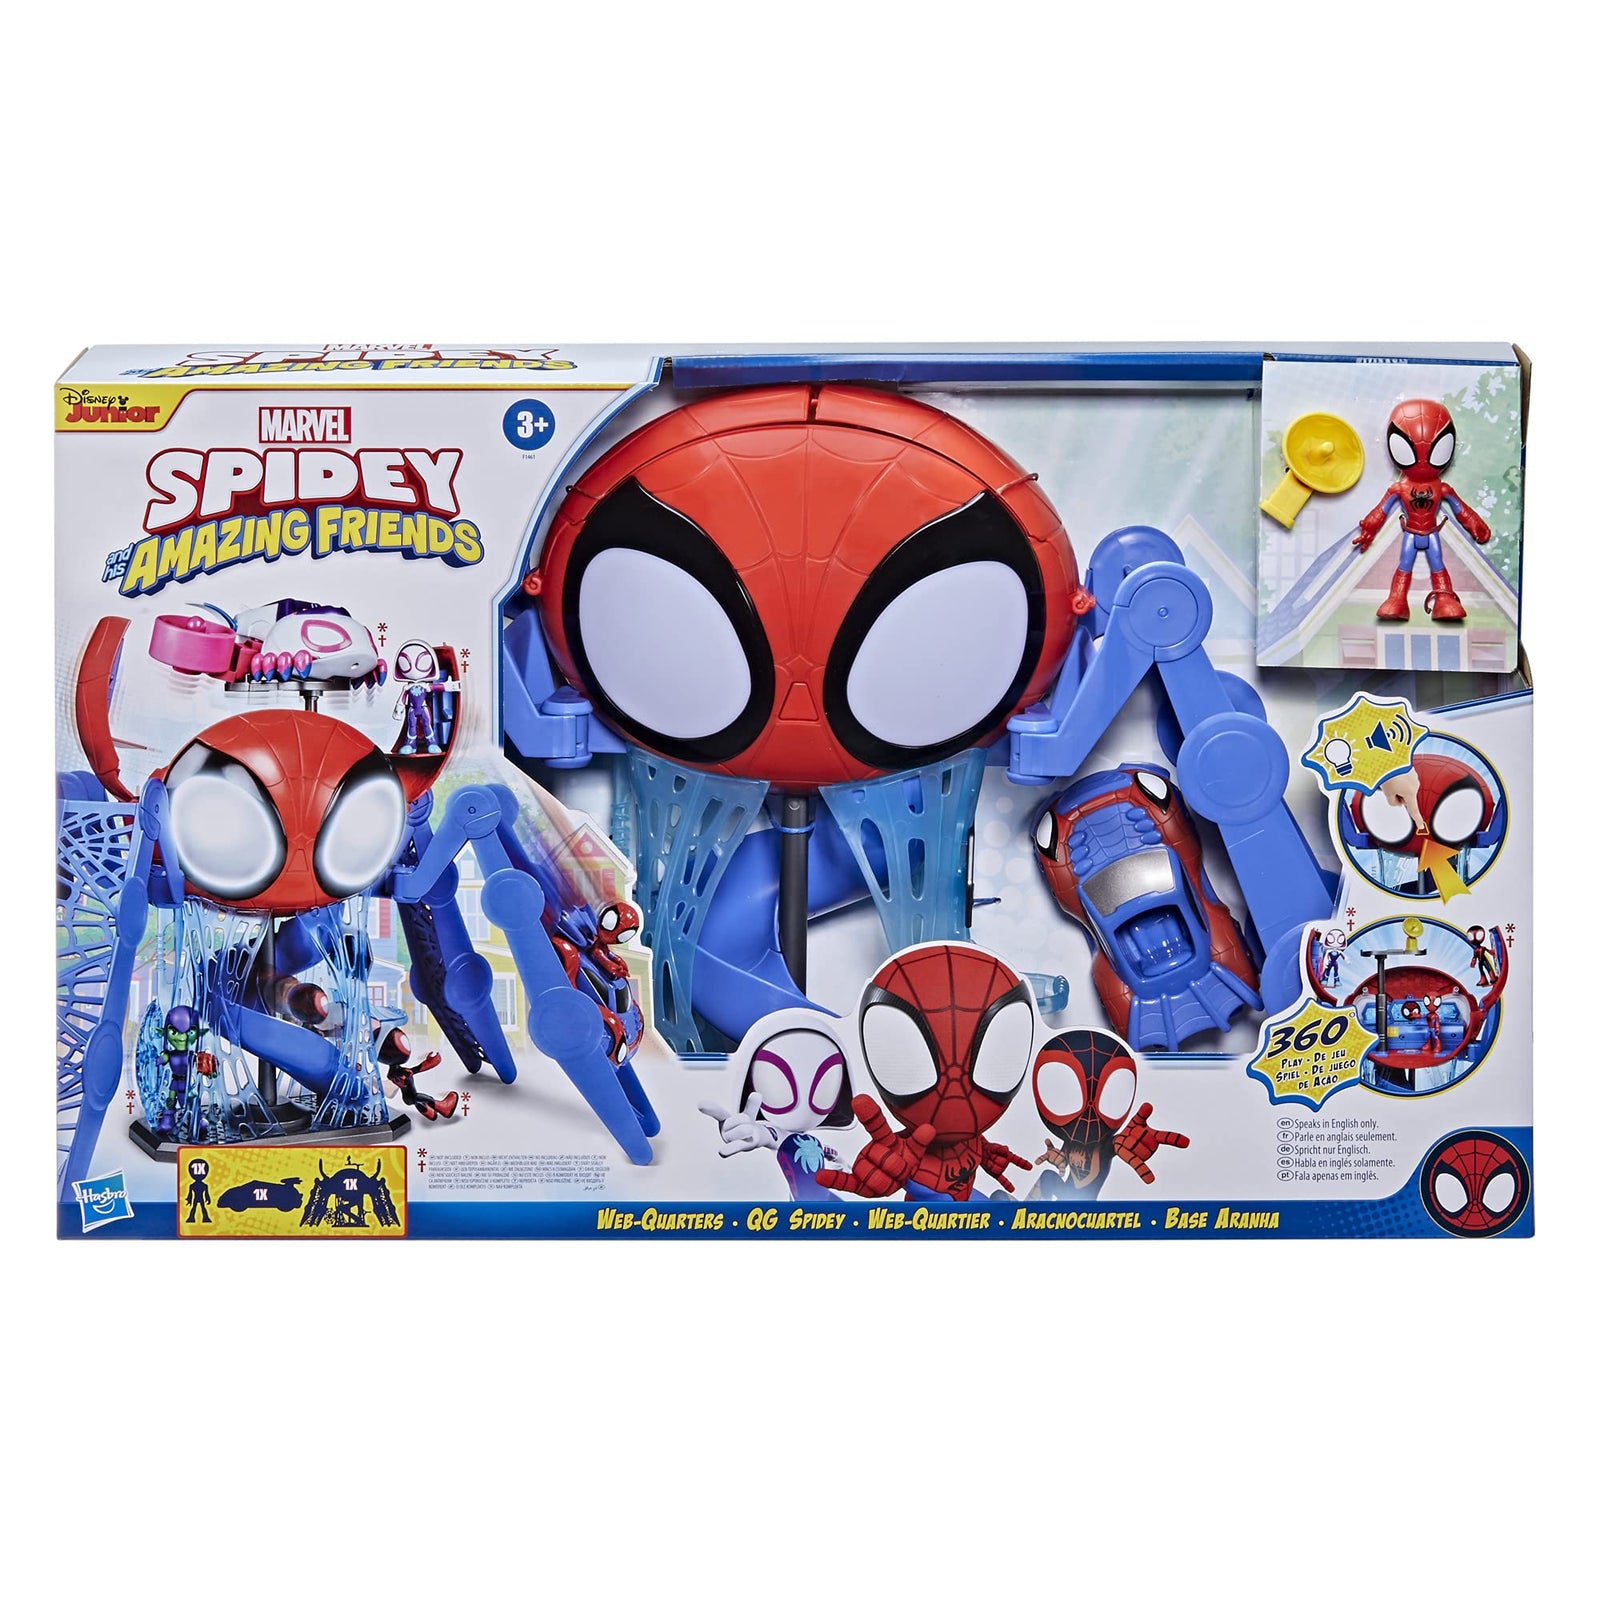 Marvel Spidey and His Amazing Friends Web-Quarters Playset with Lights and Sounds, Includes Spidey Figure and Vehicle, for Kids Ages 3 and Up